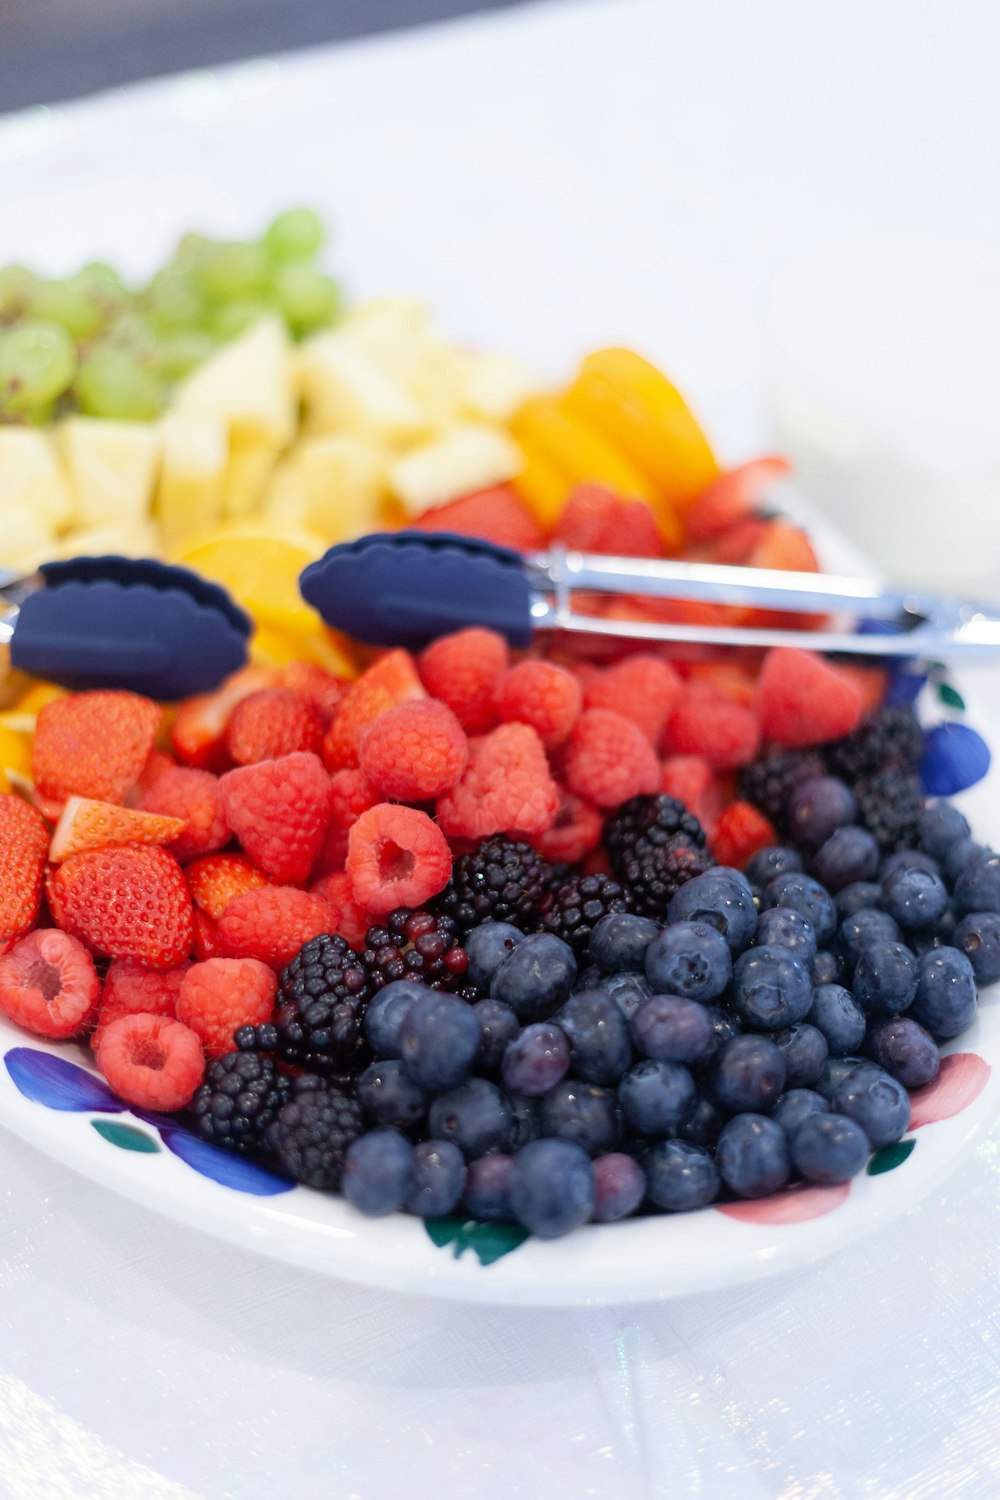 blue berries and sliced fruits on white ceramic bowl